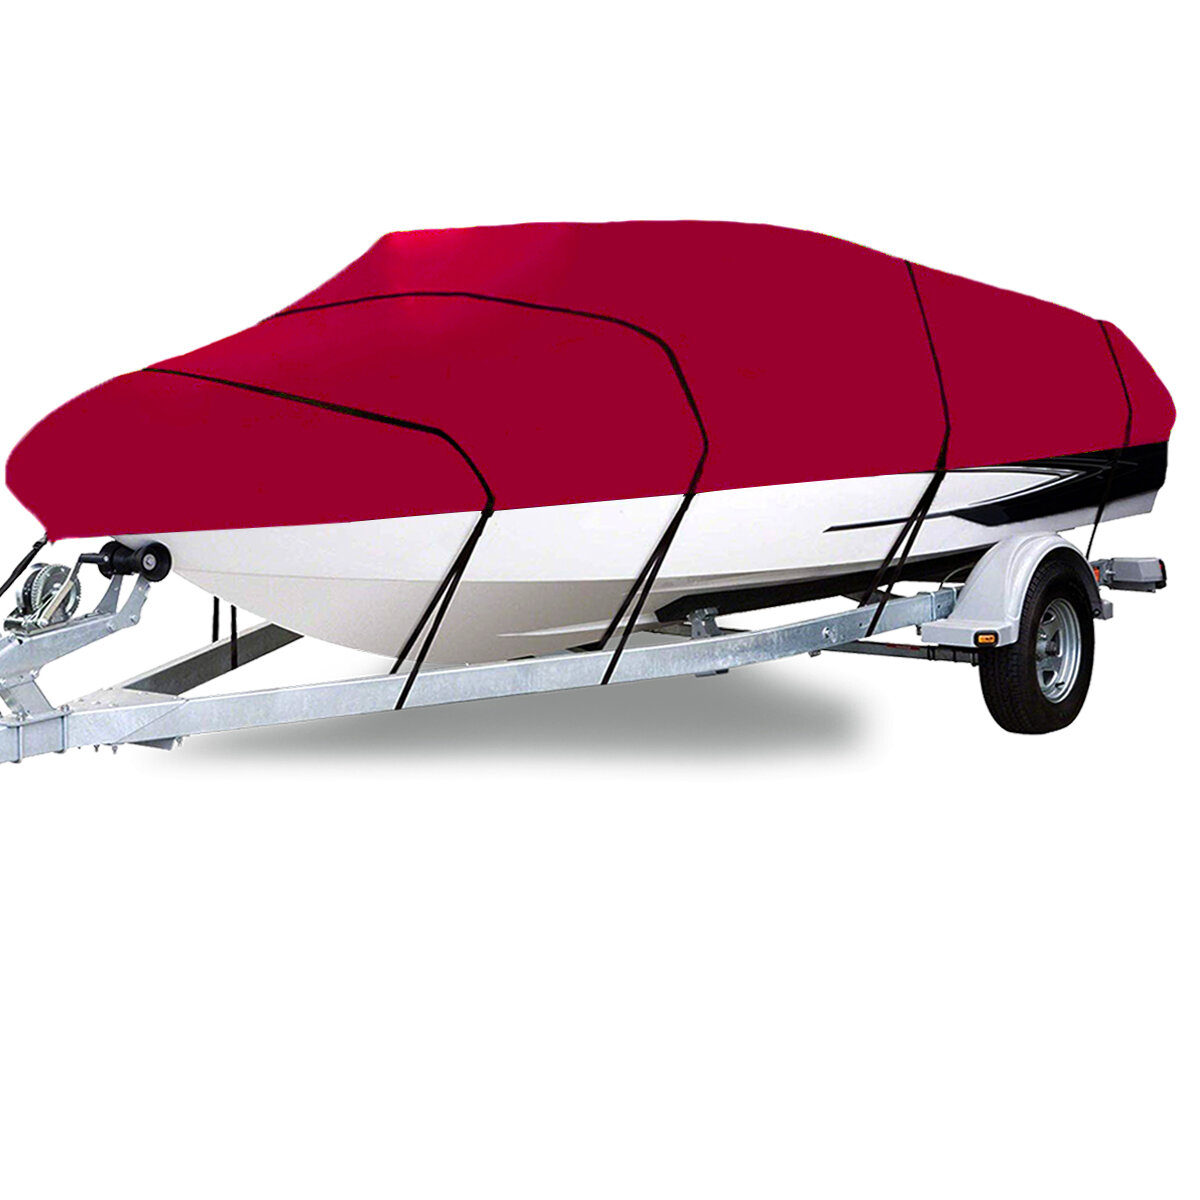 

210D 11-22FT Heavy Duty Boat Cover Waterproof Dustproof Trailerable Fishing Ski Bass V-Hull Runabouts Red